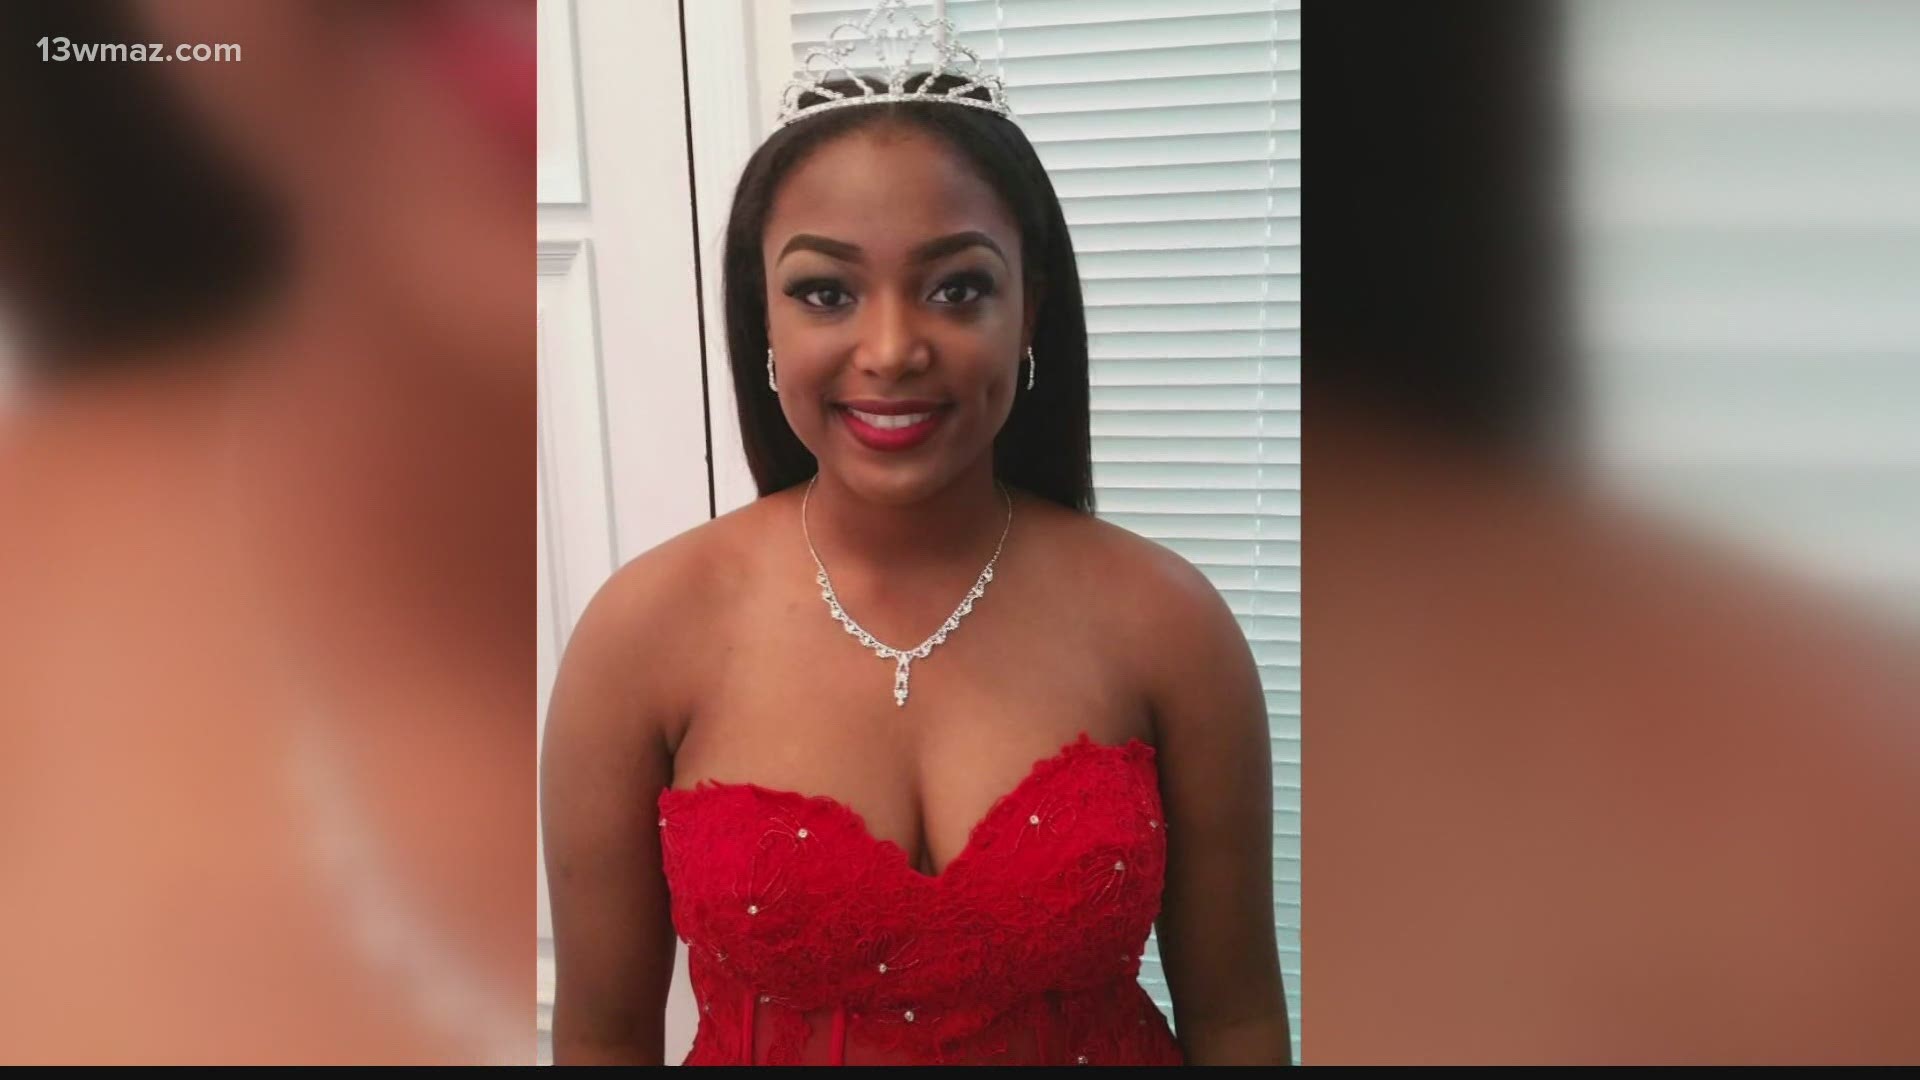 This Valentine's Day will mark one year since 22-year-old Anitra Gunn was last seen alive. Since then, law enforcement charged two men in her death.